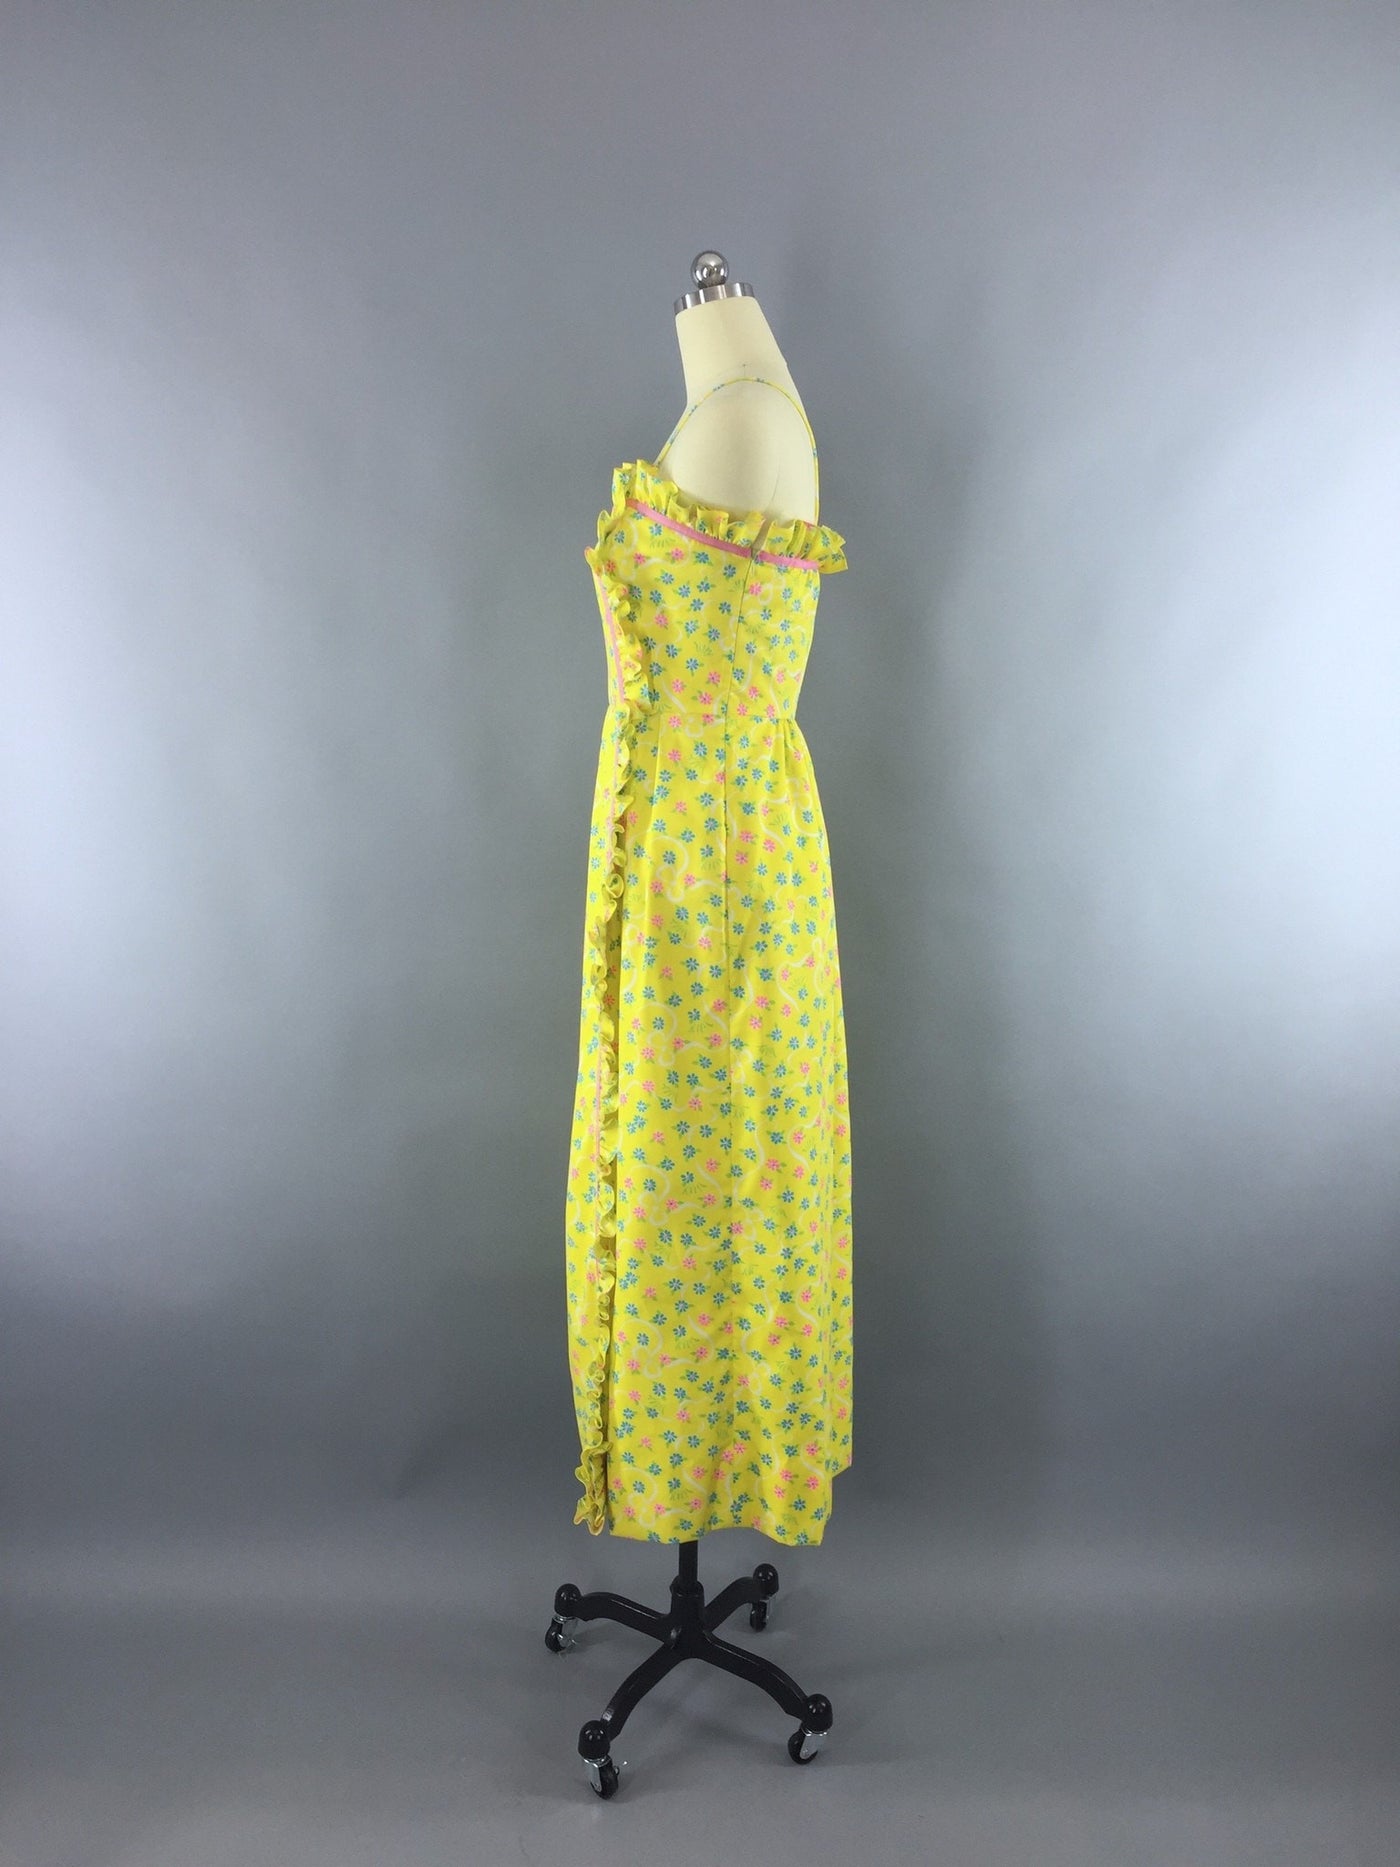 Vintage 1960s Lilly Pulitzer Dress / The Lilly Yellow Floral Print Maxi Dress - ThisBlueBird